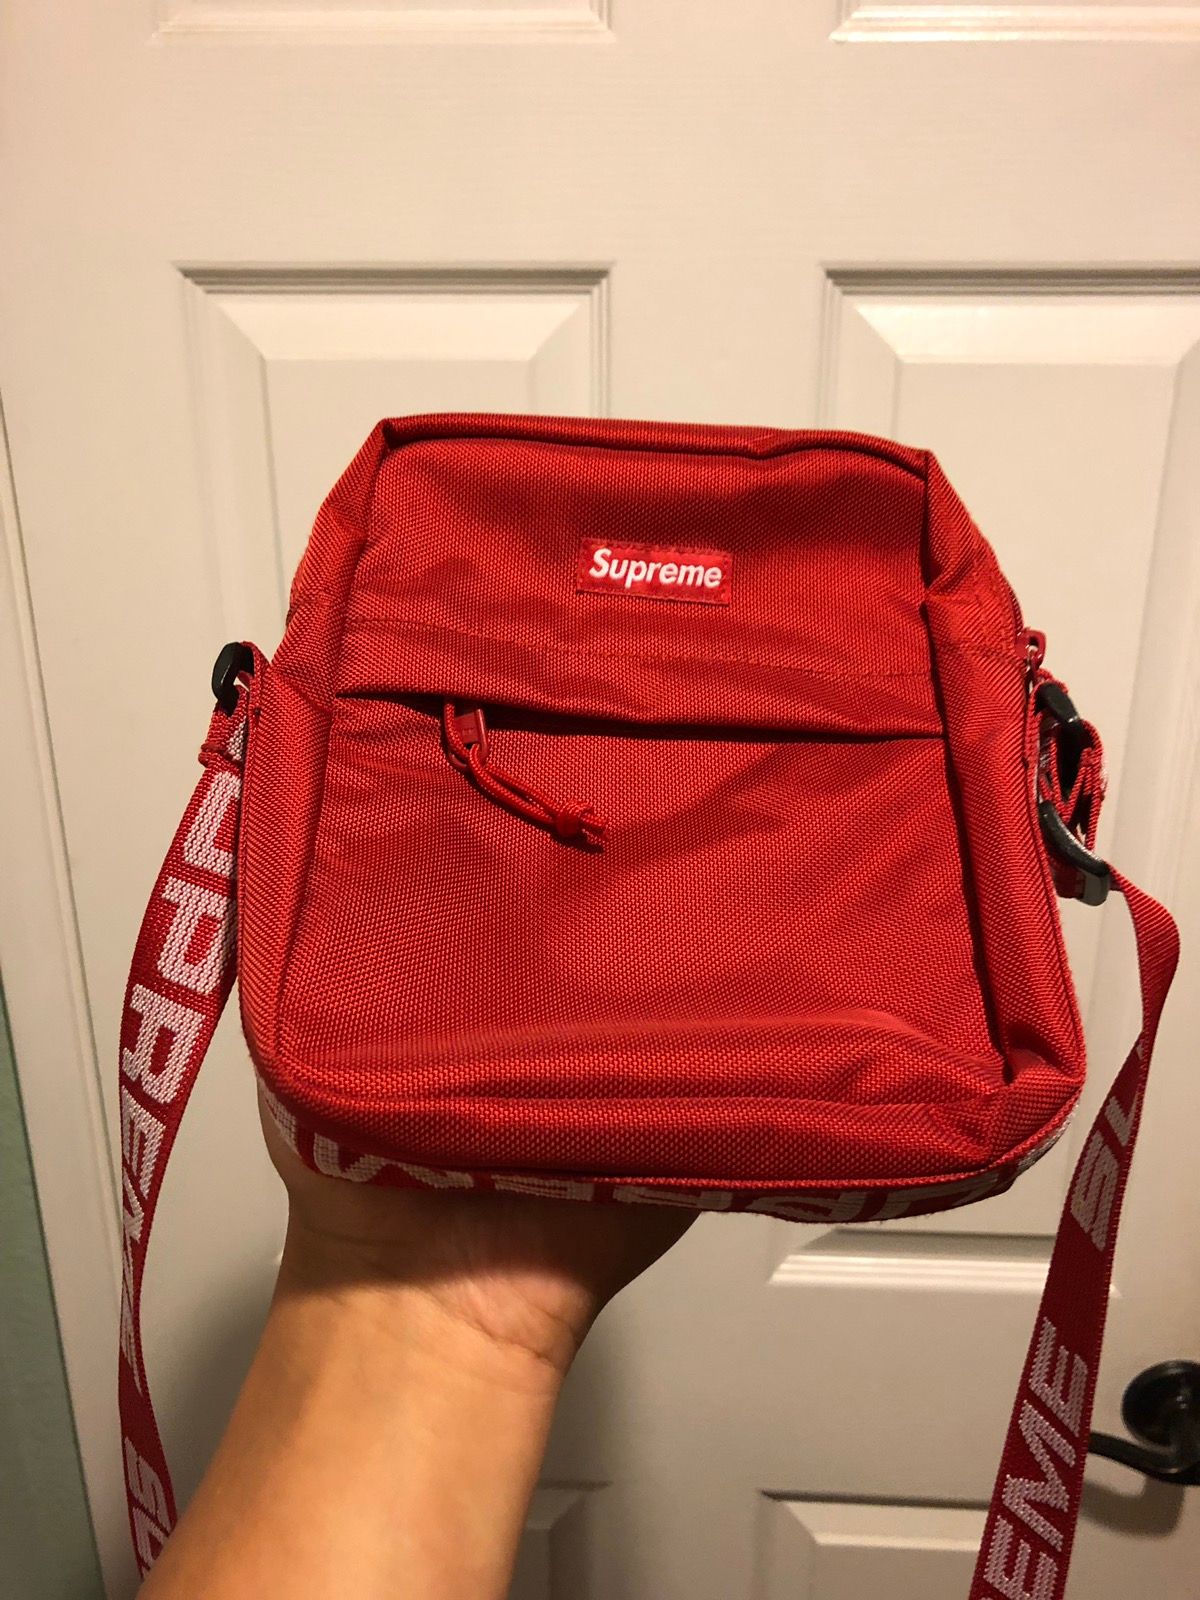 Supreme Supreme Shoulder Bag Red SS18 Size ONE SIZE - 1 Preview